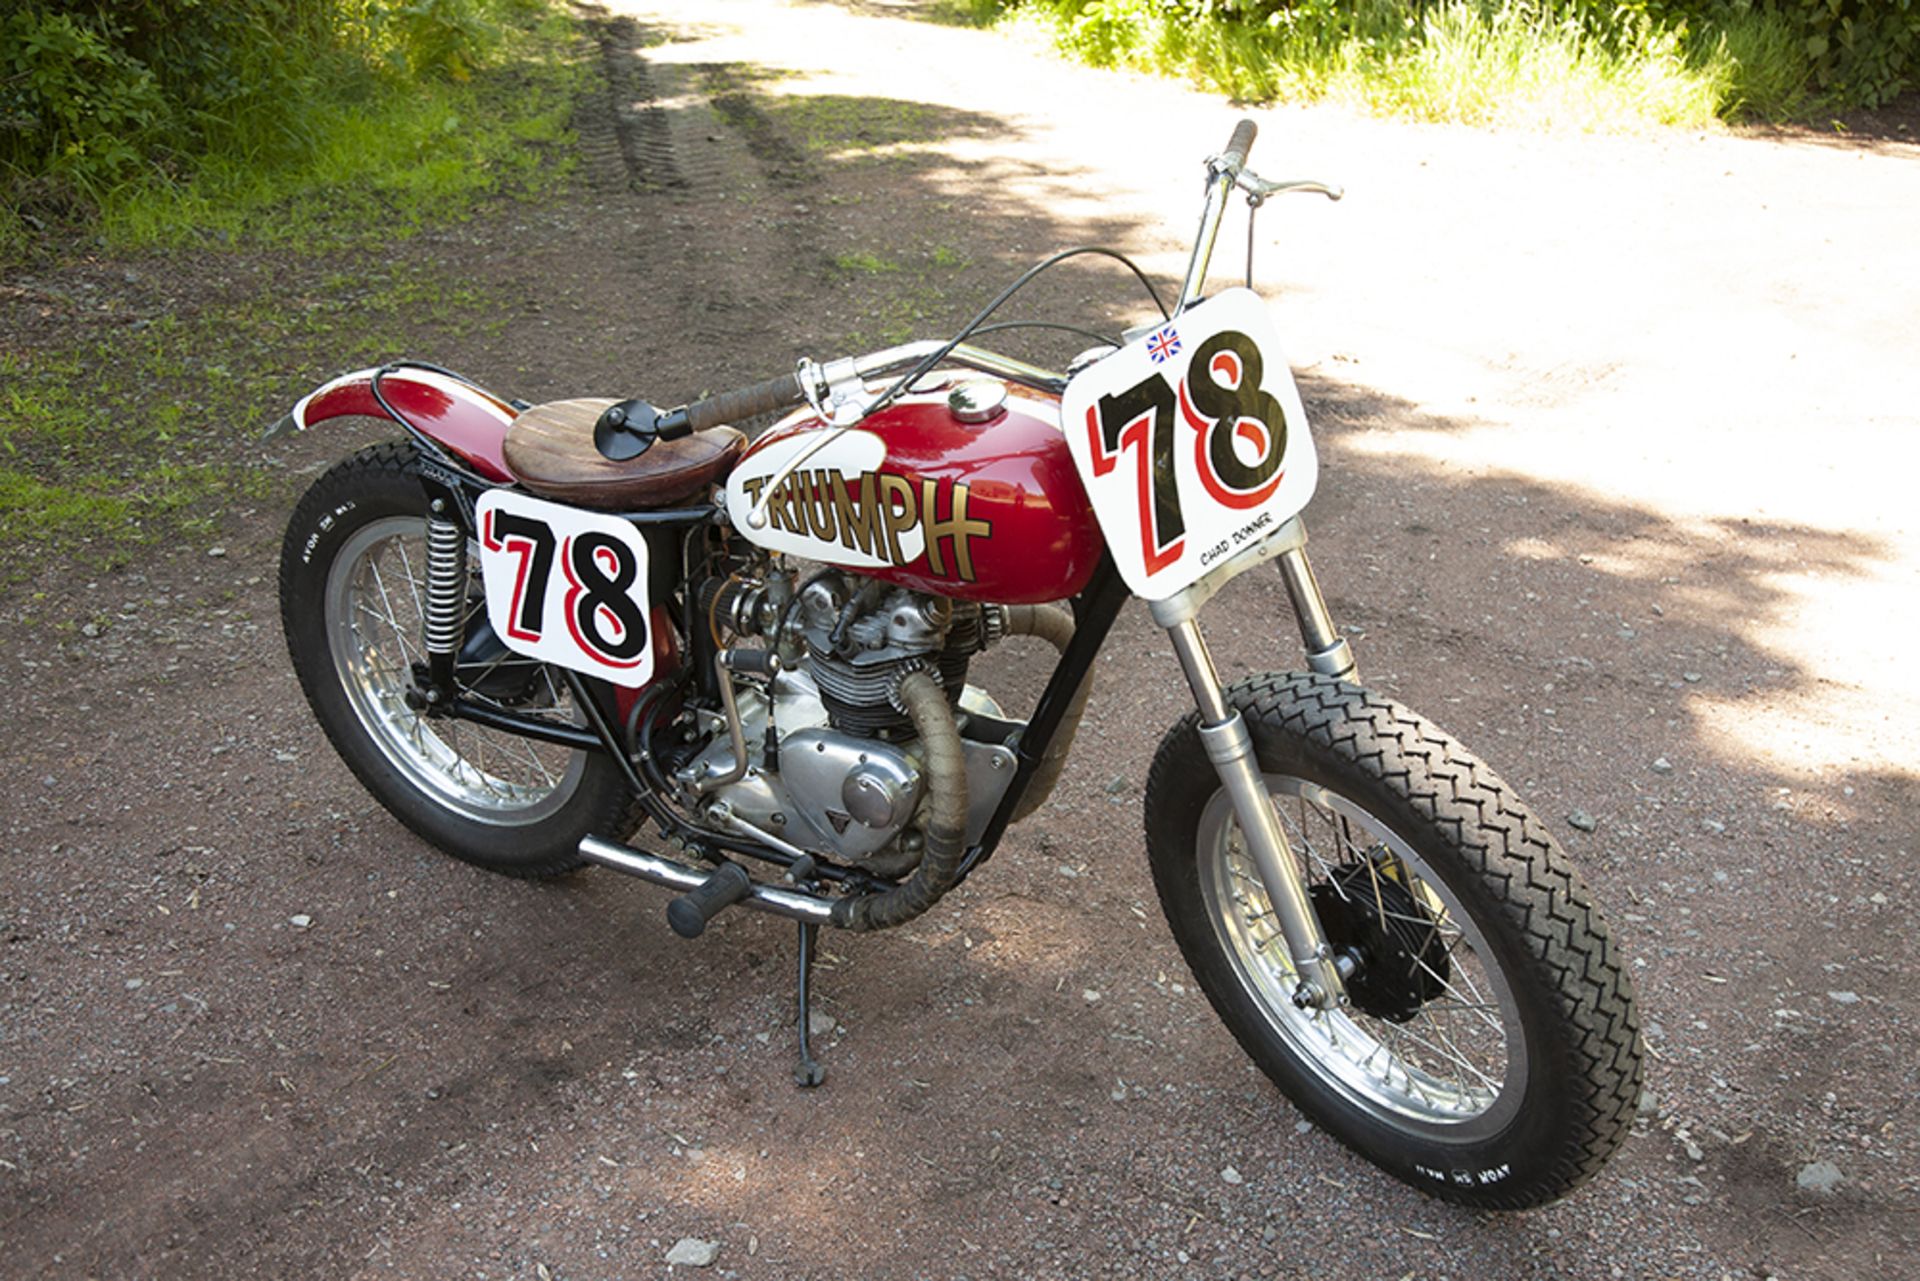 1964 Triumph 3TA speed twin motorcycle - Image 6 of 10